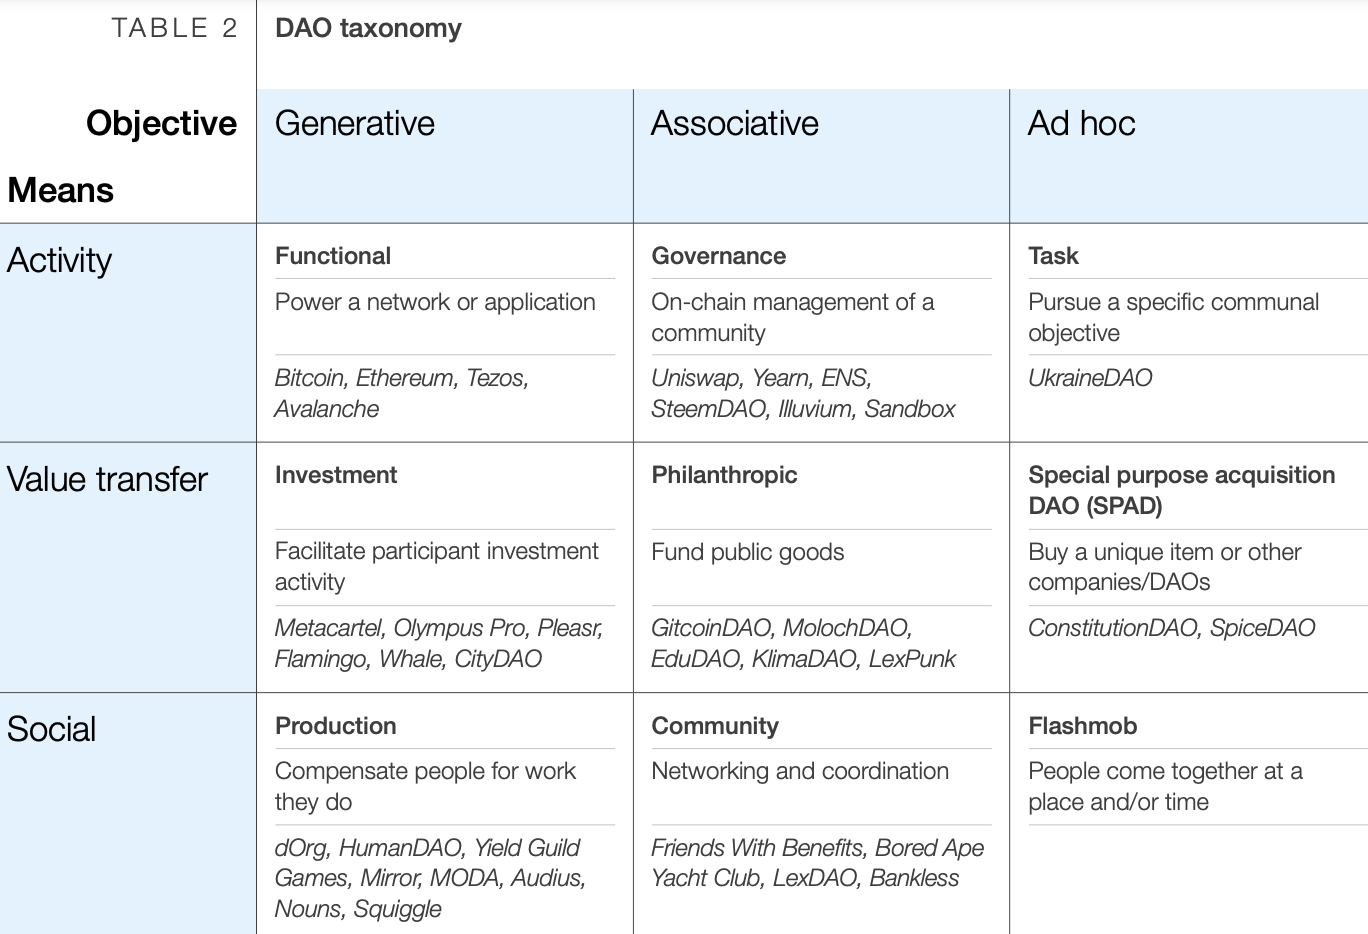 Categories of DAO according to the World Economic Forum